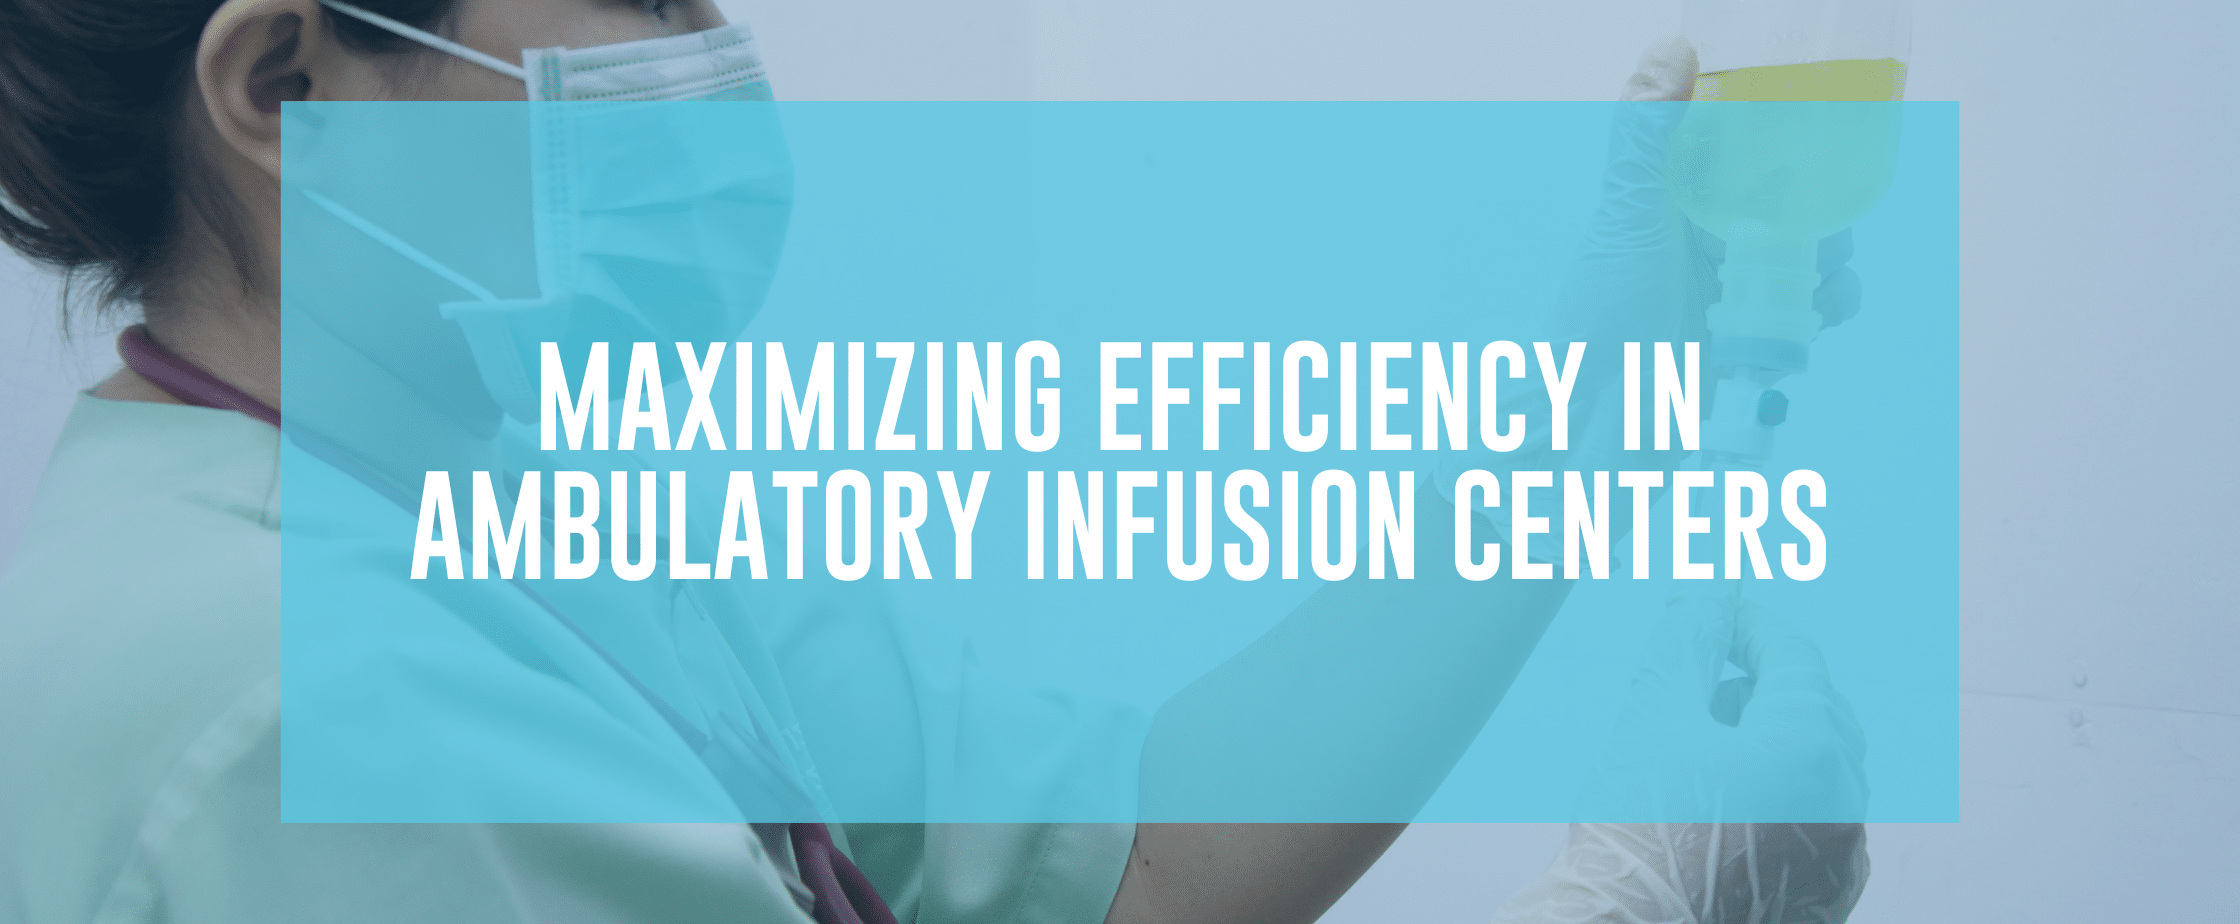 Featured image for Maximizing Efficiency in Ambulatory Infusion Centers